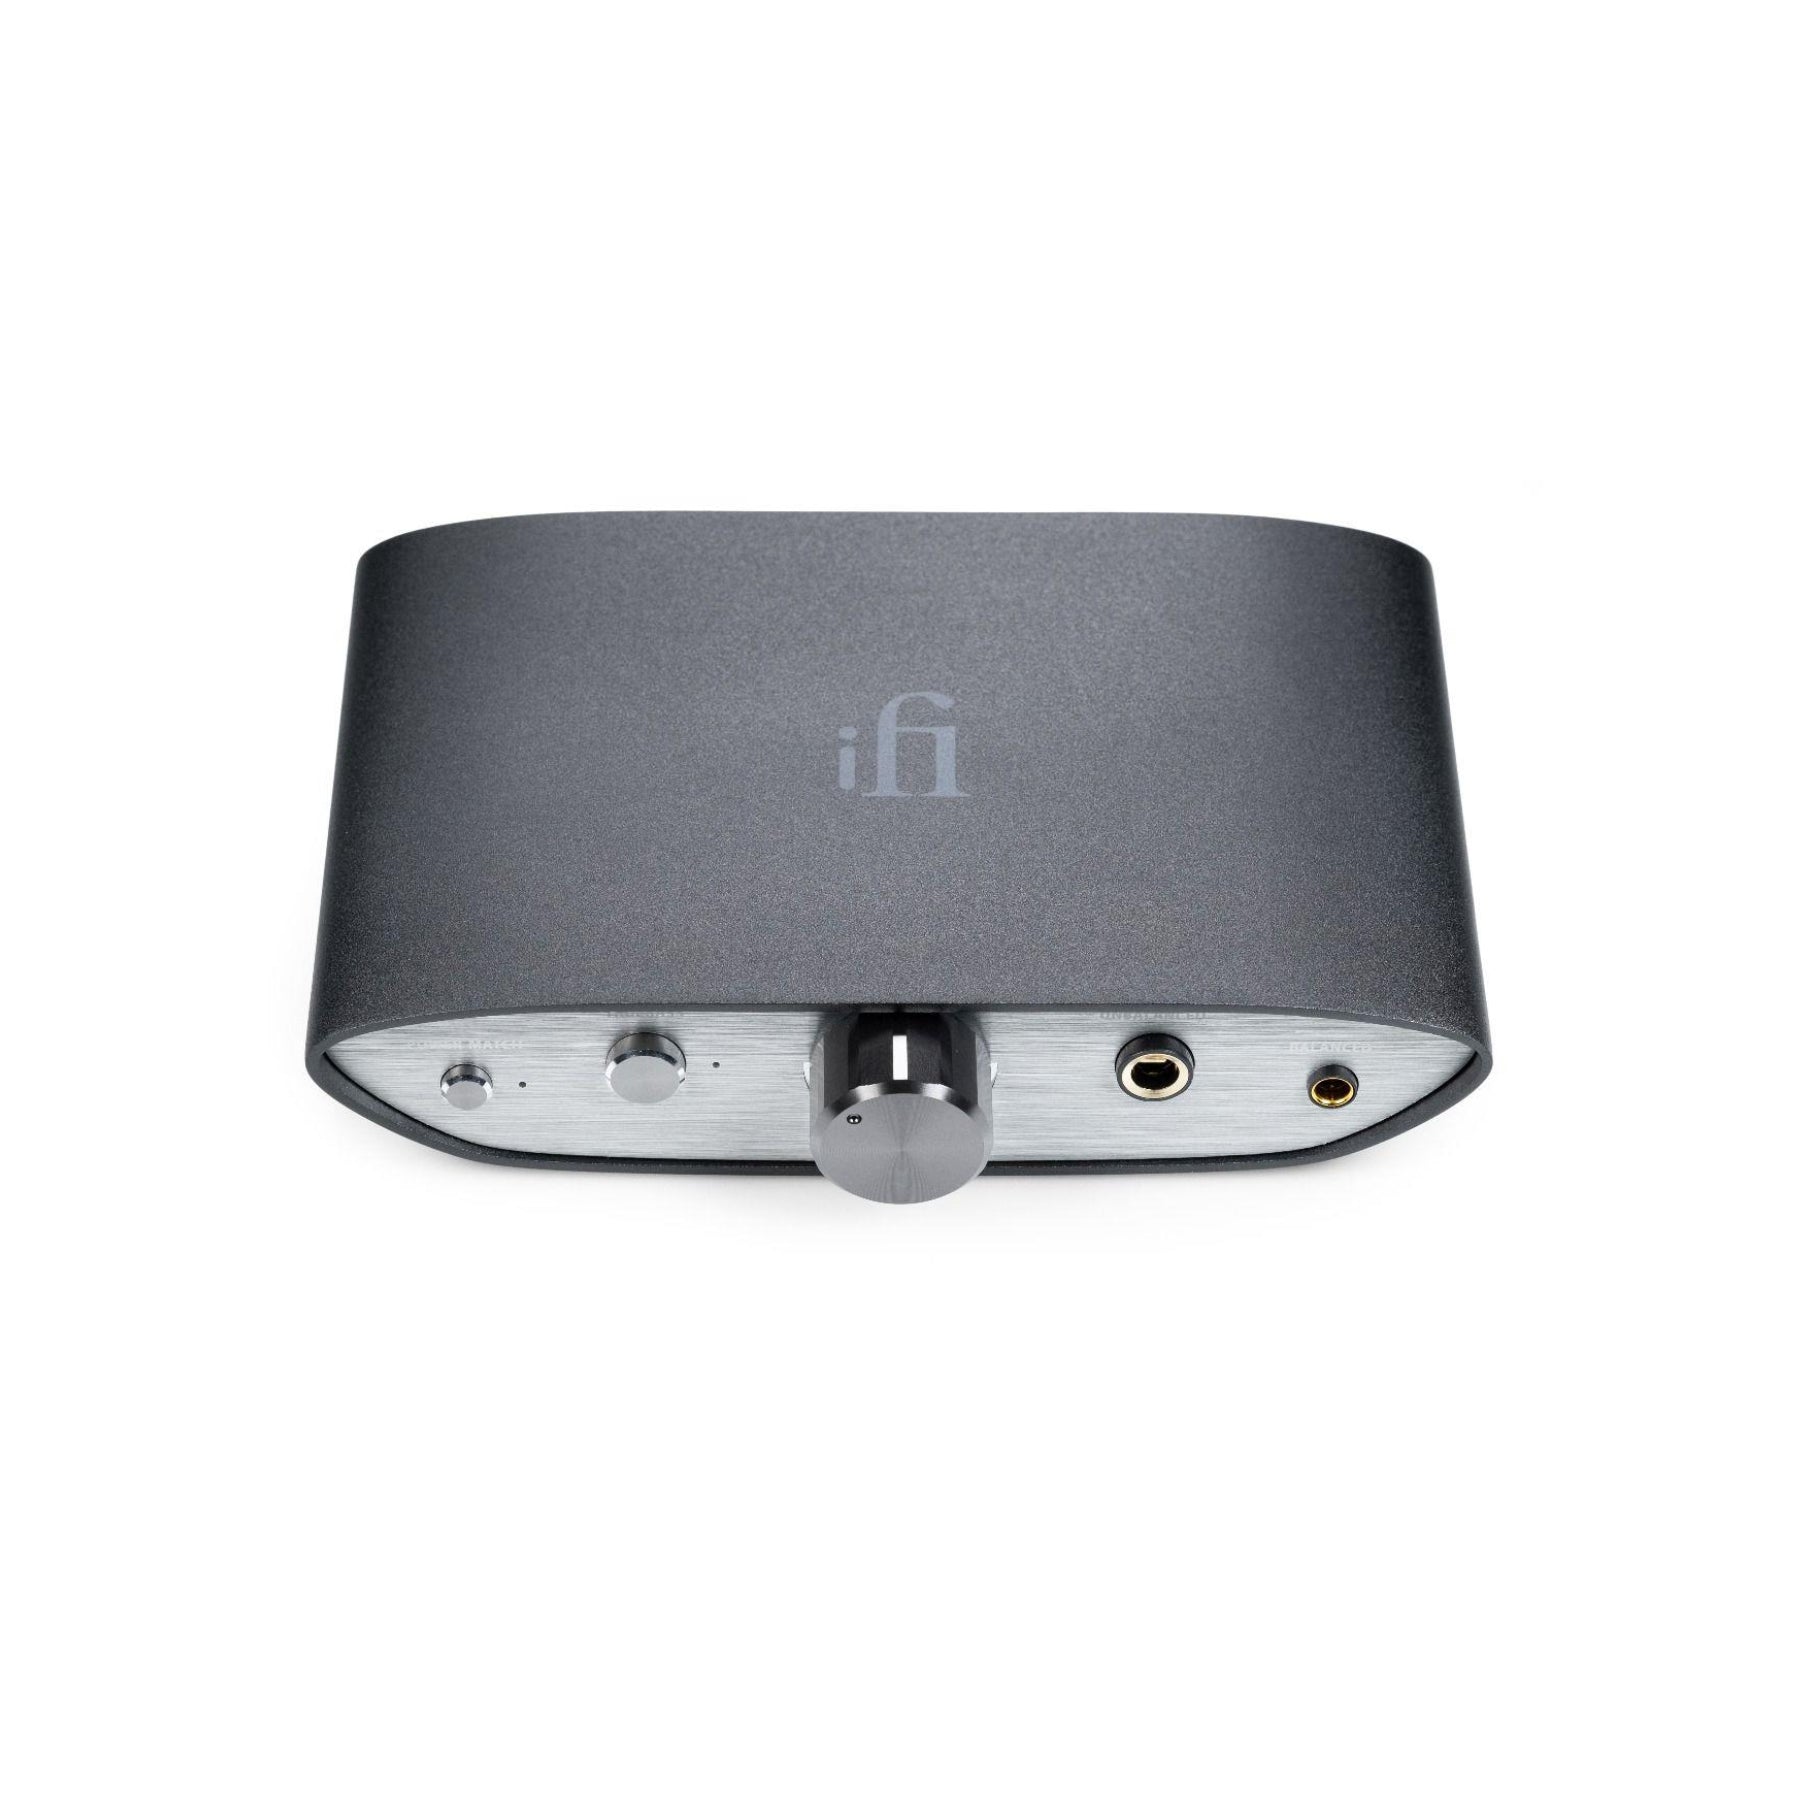 ZEN DAC V2 by iFi audio - Super-affordable DAC/amp from iFi audio